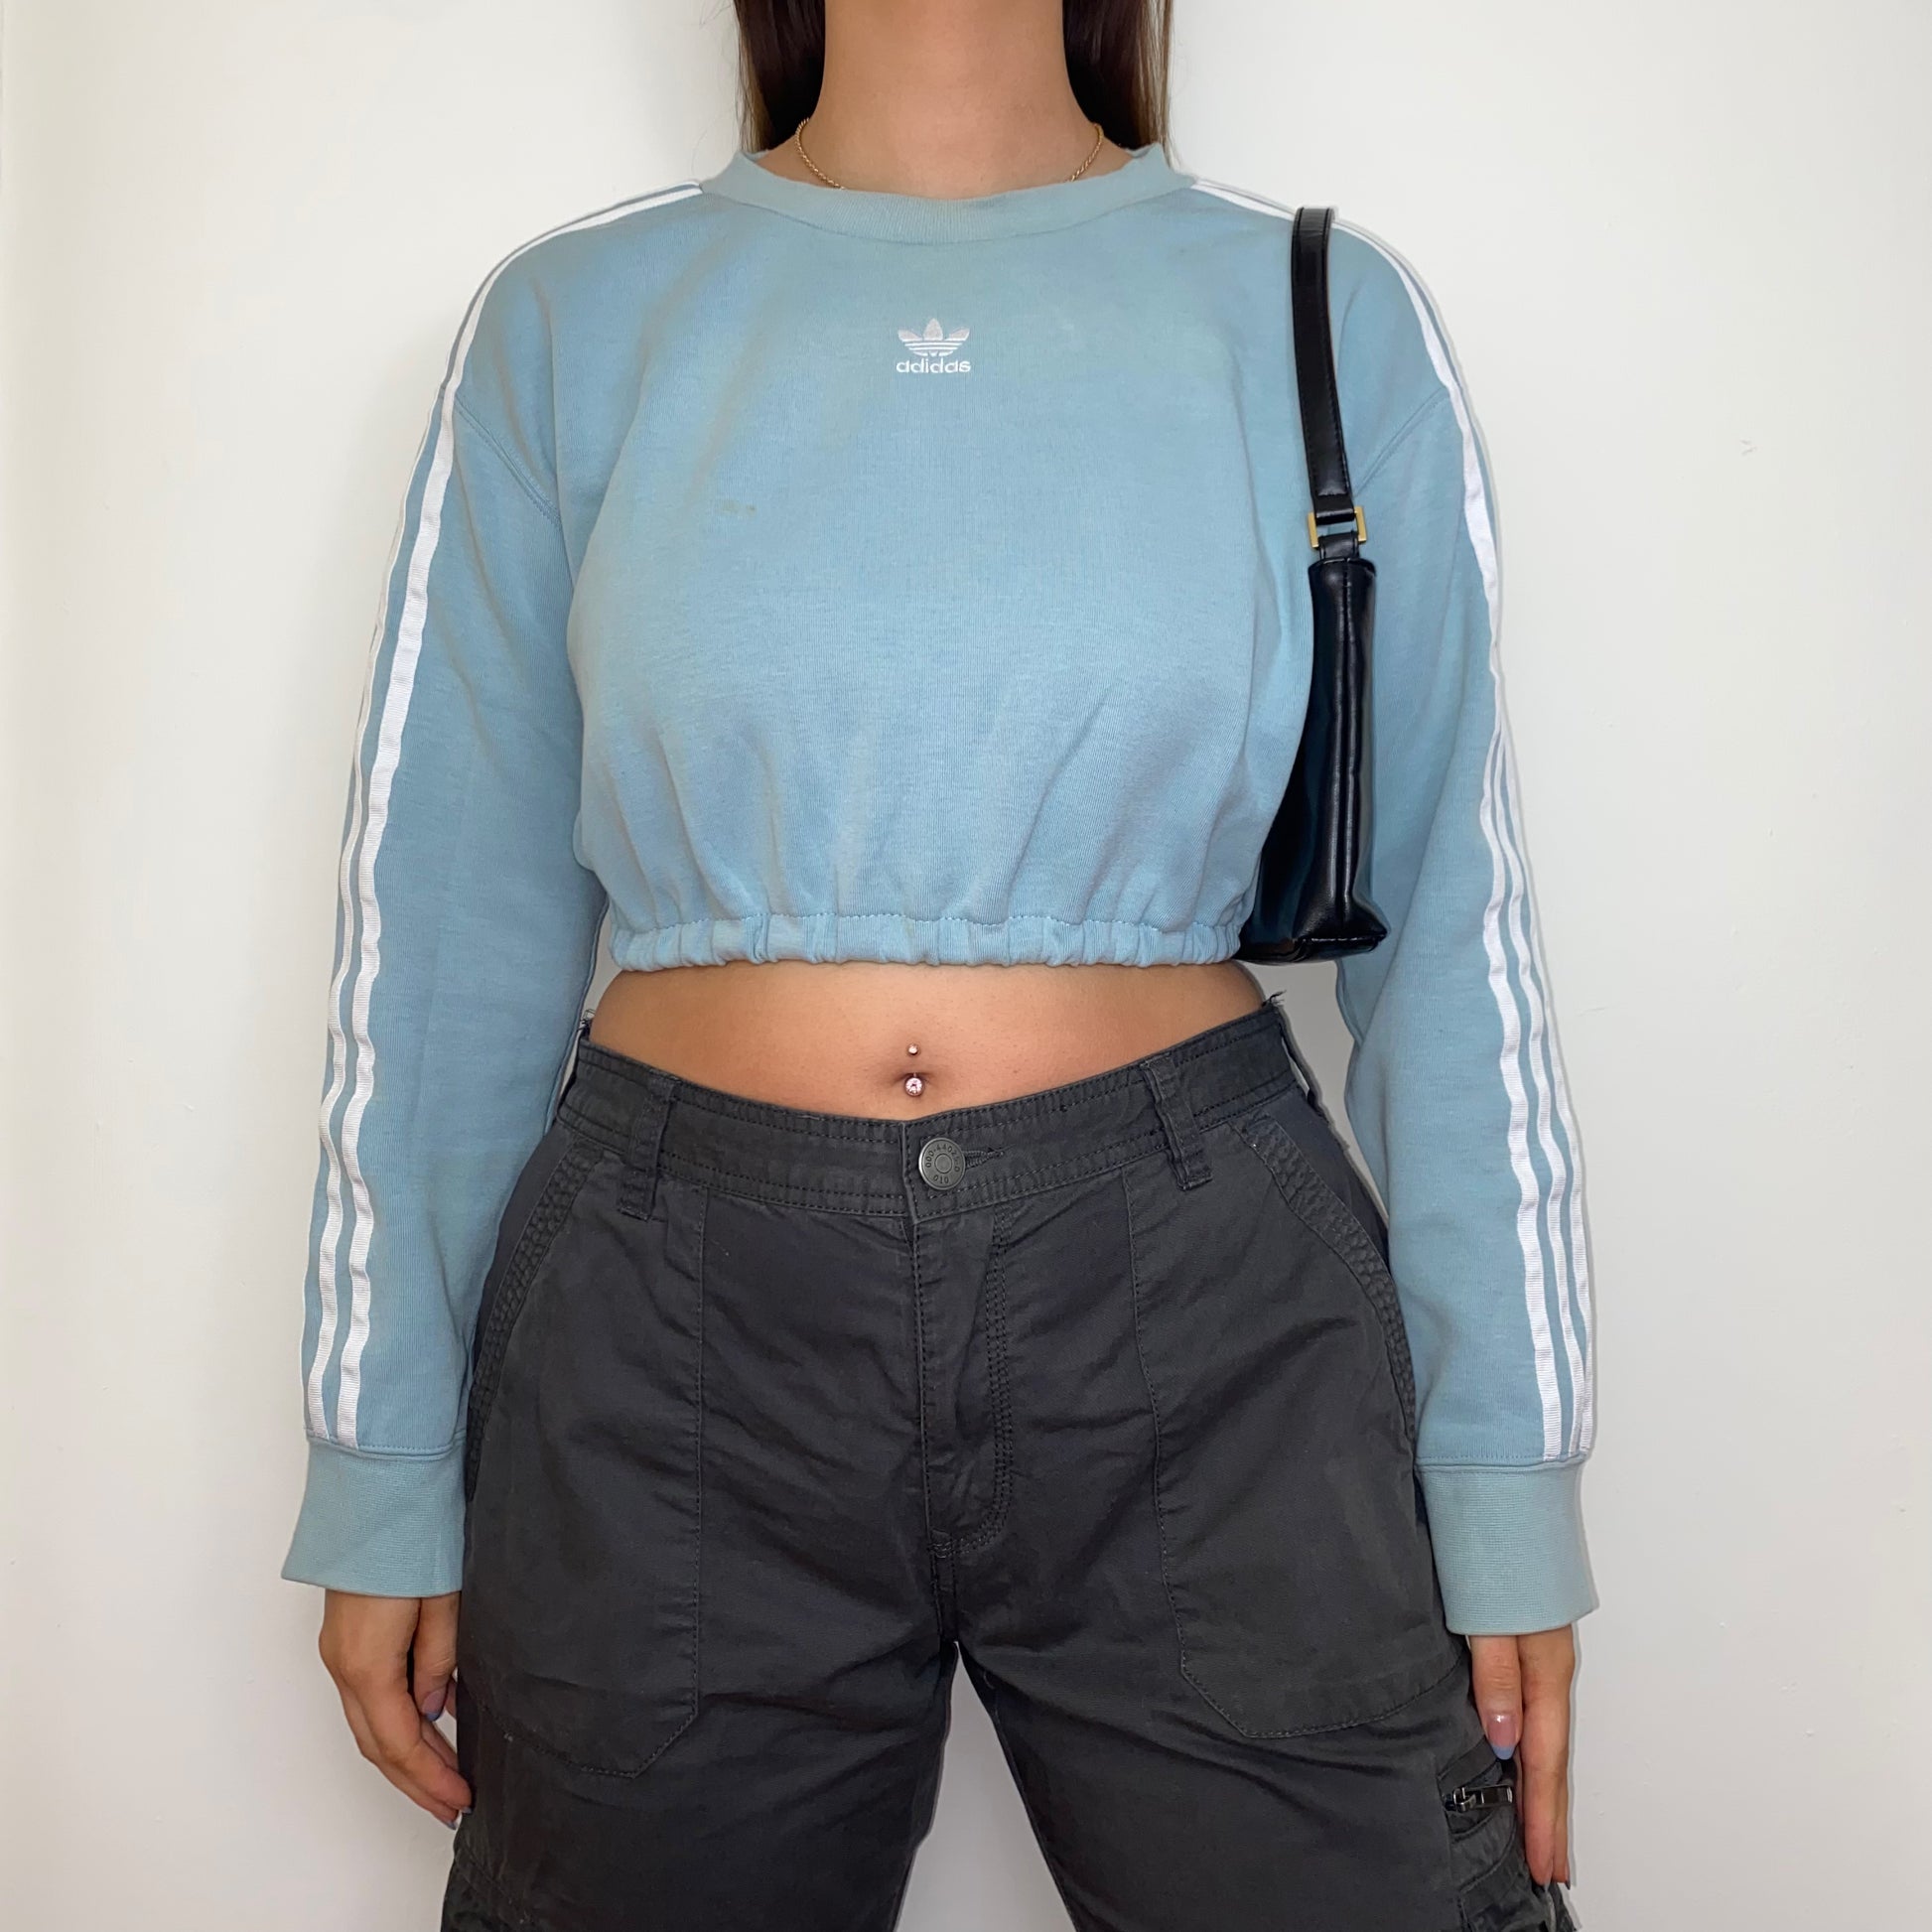 light blue cropped sweatshirt with white adidas logo shown on a model wearing grey cargo trousers and a black shoulder bag